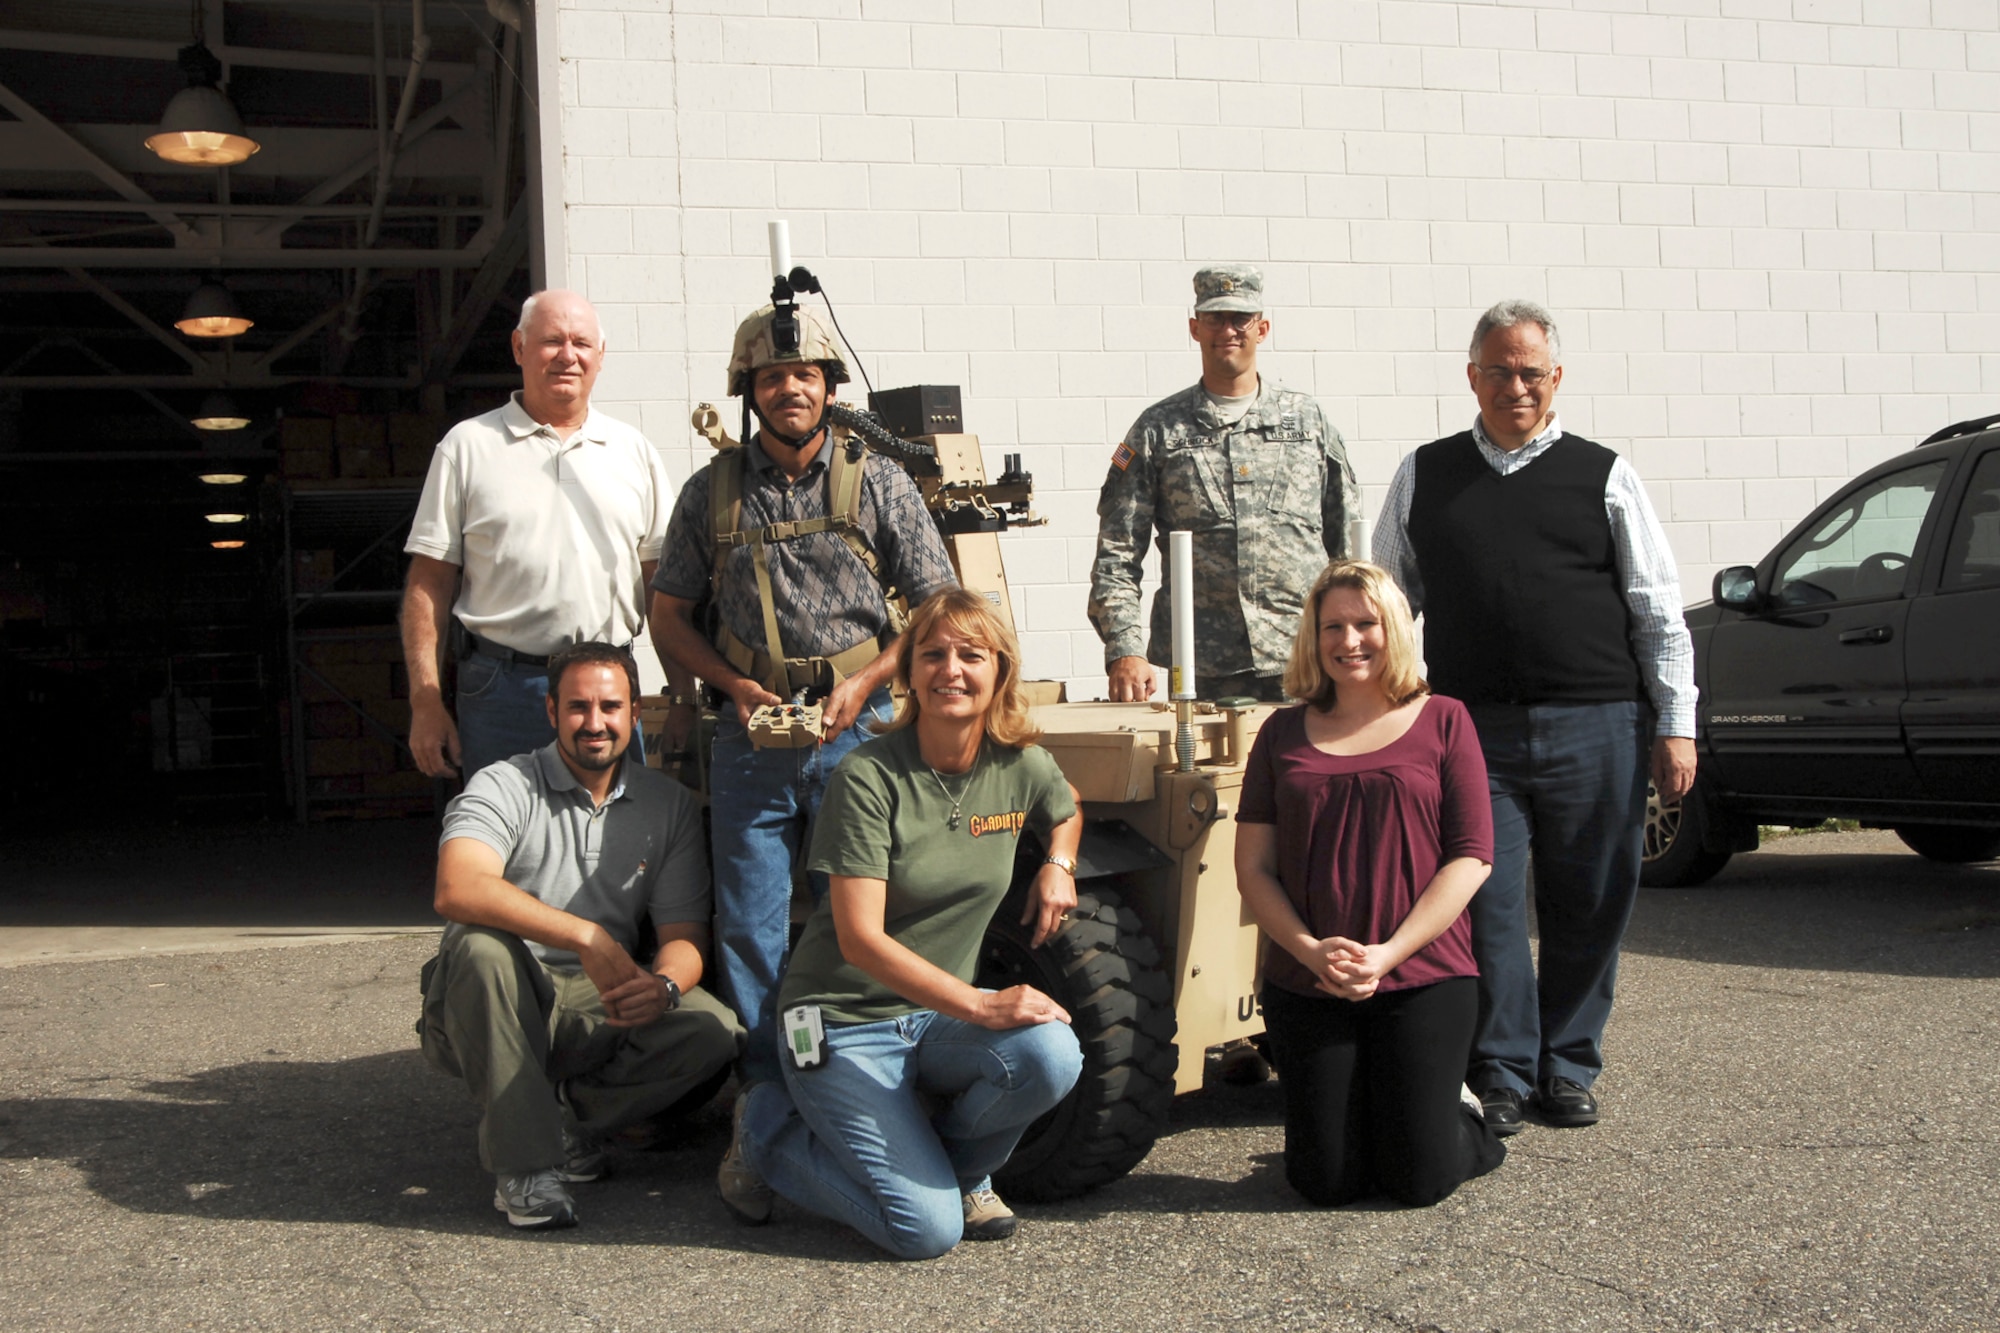 Personnel involved with the testing of the IbisTek wireless data link radio at Selfridge Air National Guard Base, Mich., last week, gather around the Gladiator robot.  The unique joint nature of the base in the northern suburbs of the metro-Detroit area, brought together many parts of the Army and the Air Force to create a cost-saving test environment for the radio which promised increased range for use on an Unmanned Ground Vehicle.  In this photo (left to right, starting back row), Mr. Greg Hudson, robot technician; JS RPO; Mr. Randall Ponder, engineering technician, JS RPO; the Gladiator Robot; Major Kevin Schrock, assistant manager, product APM maneuver system; Mr. Samuel Pirrone, radio frequency engineer; (front row) Mr. Robert Rappold, engineering team lead, Small Unmanned Ground Vehicles; Ms. Valerie Bolhouse, systems engineer; and Ms. Shanna Render, TARDEC Gladiator project manager.